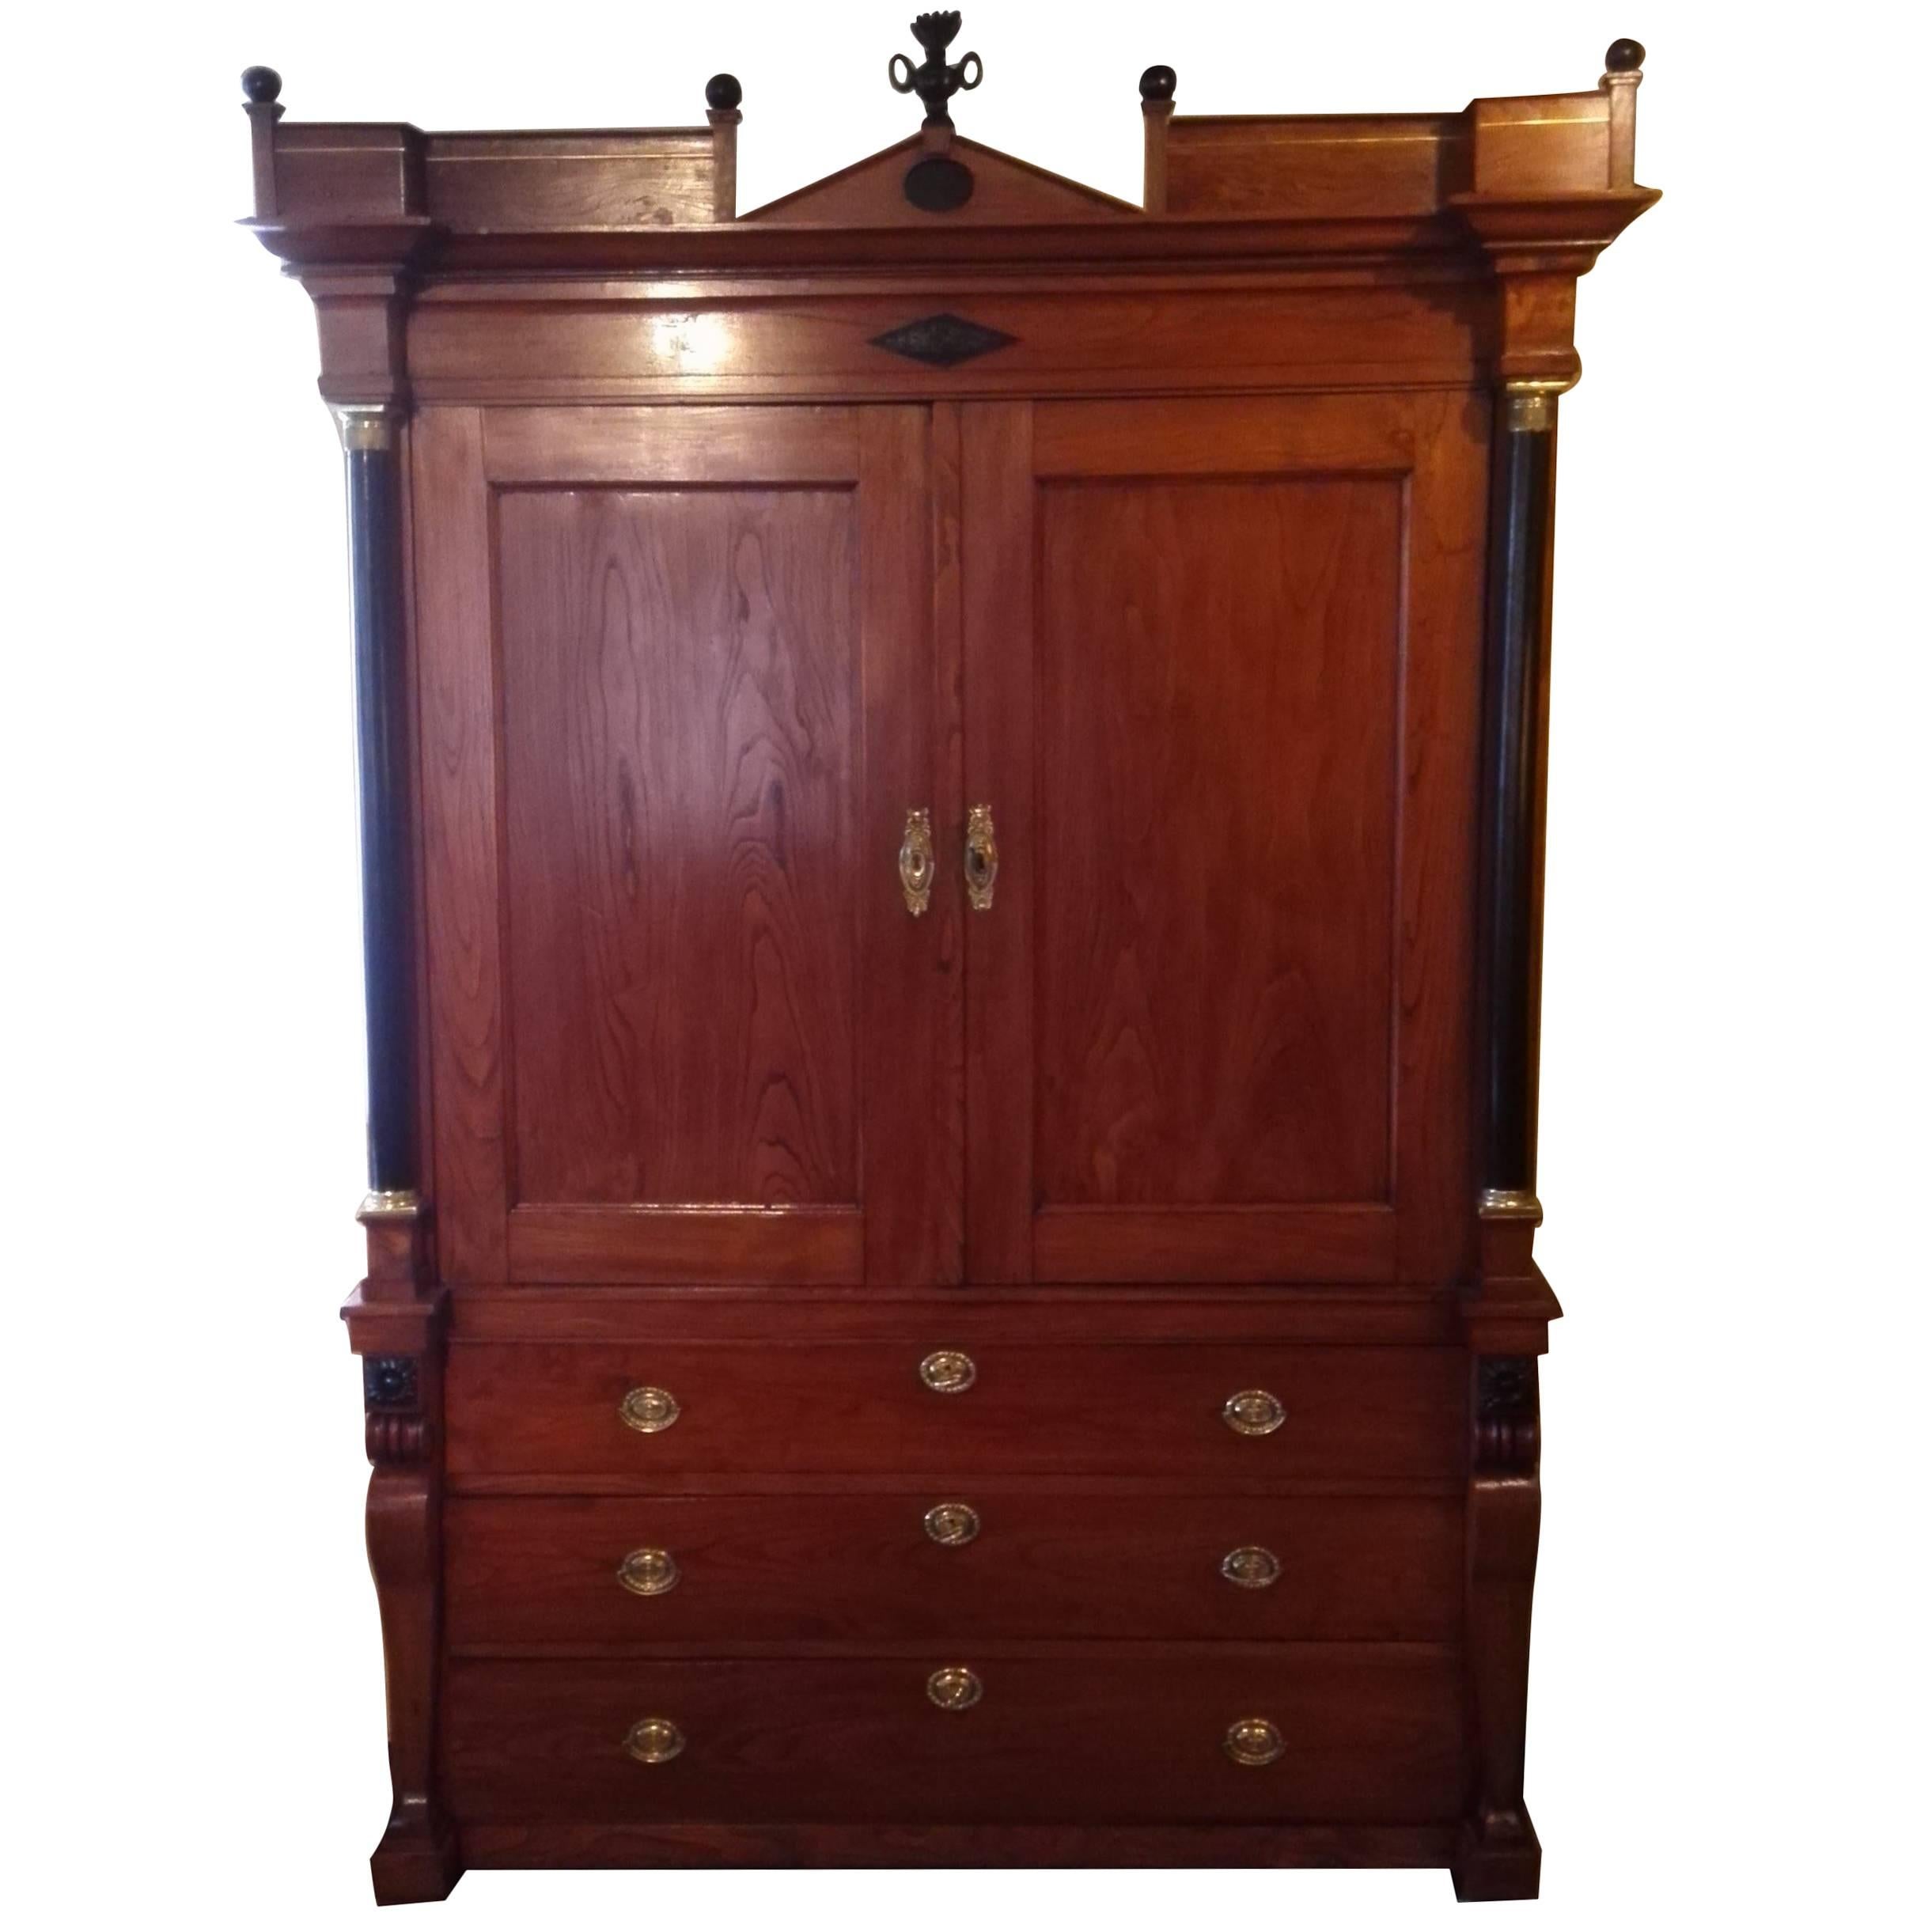 18th Century Linen-Press Cabinet in Solid Ash Wood in the Art Fair Condition For Sale